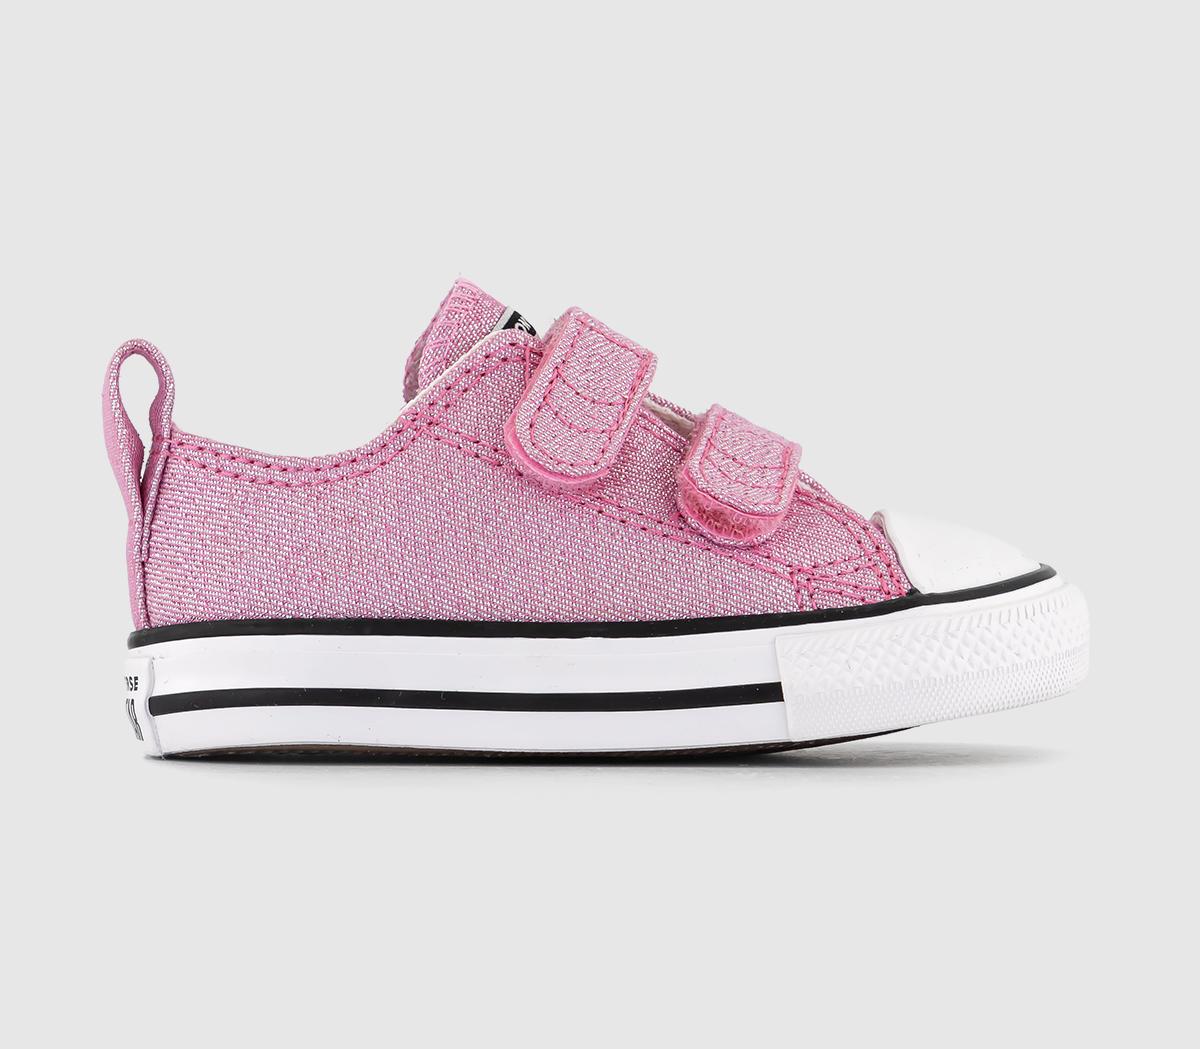 ConverseAll Star 2vlace Infant Trainers Pink Black White